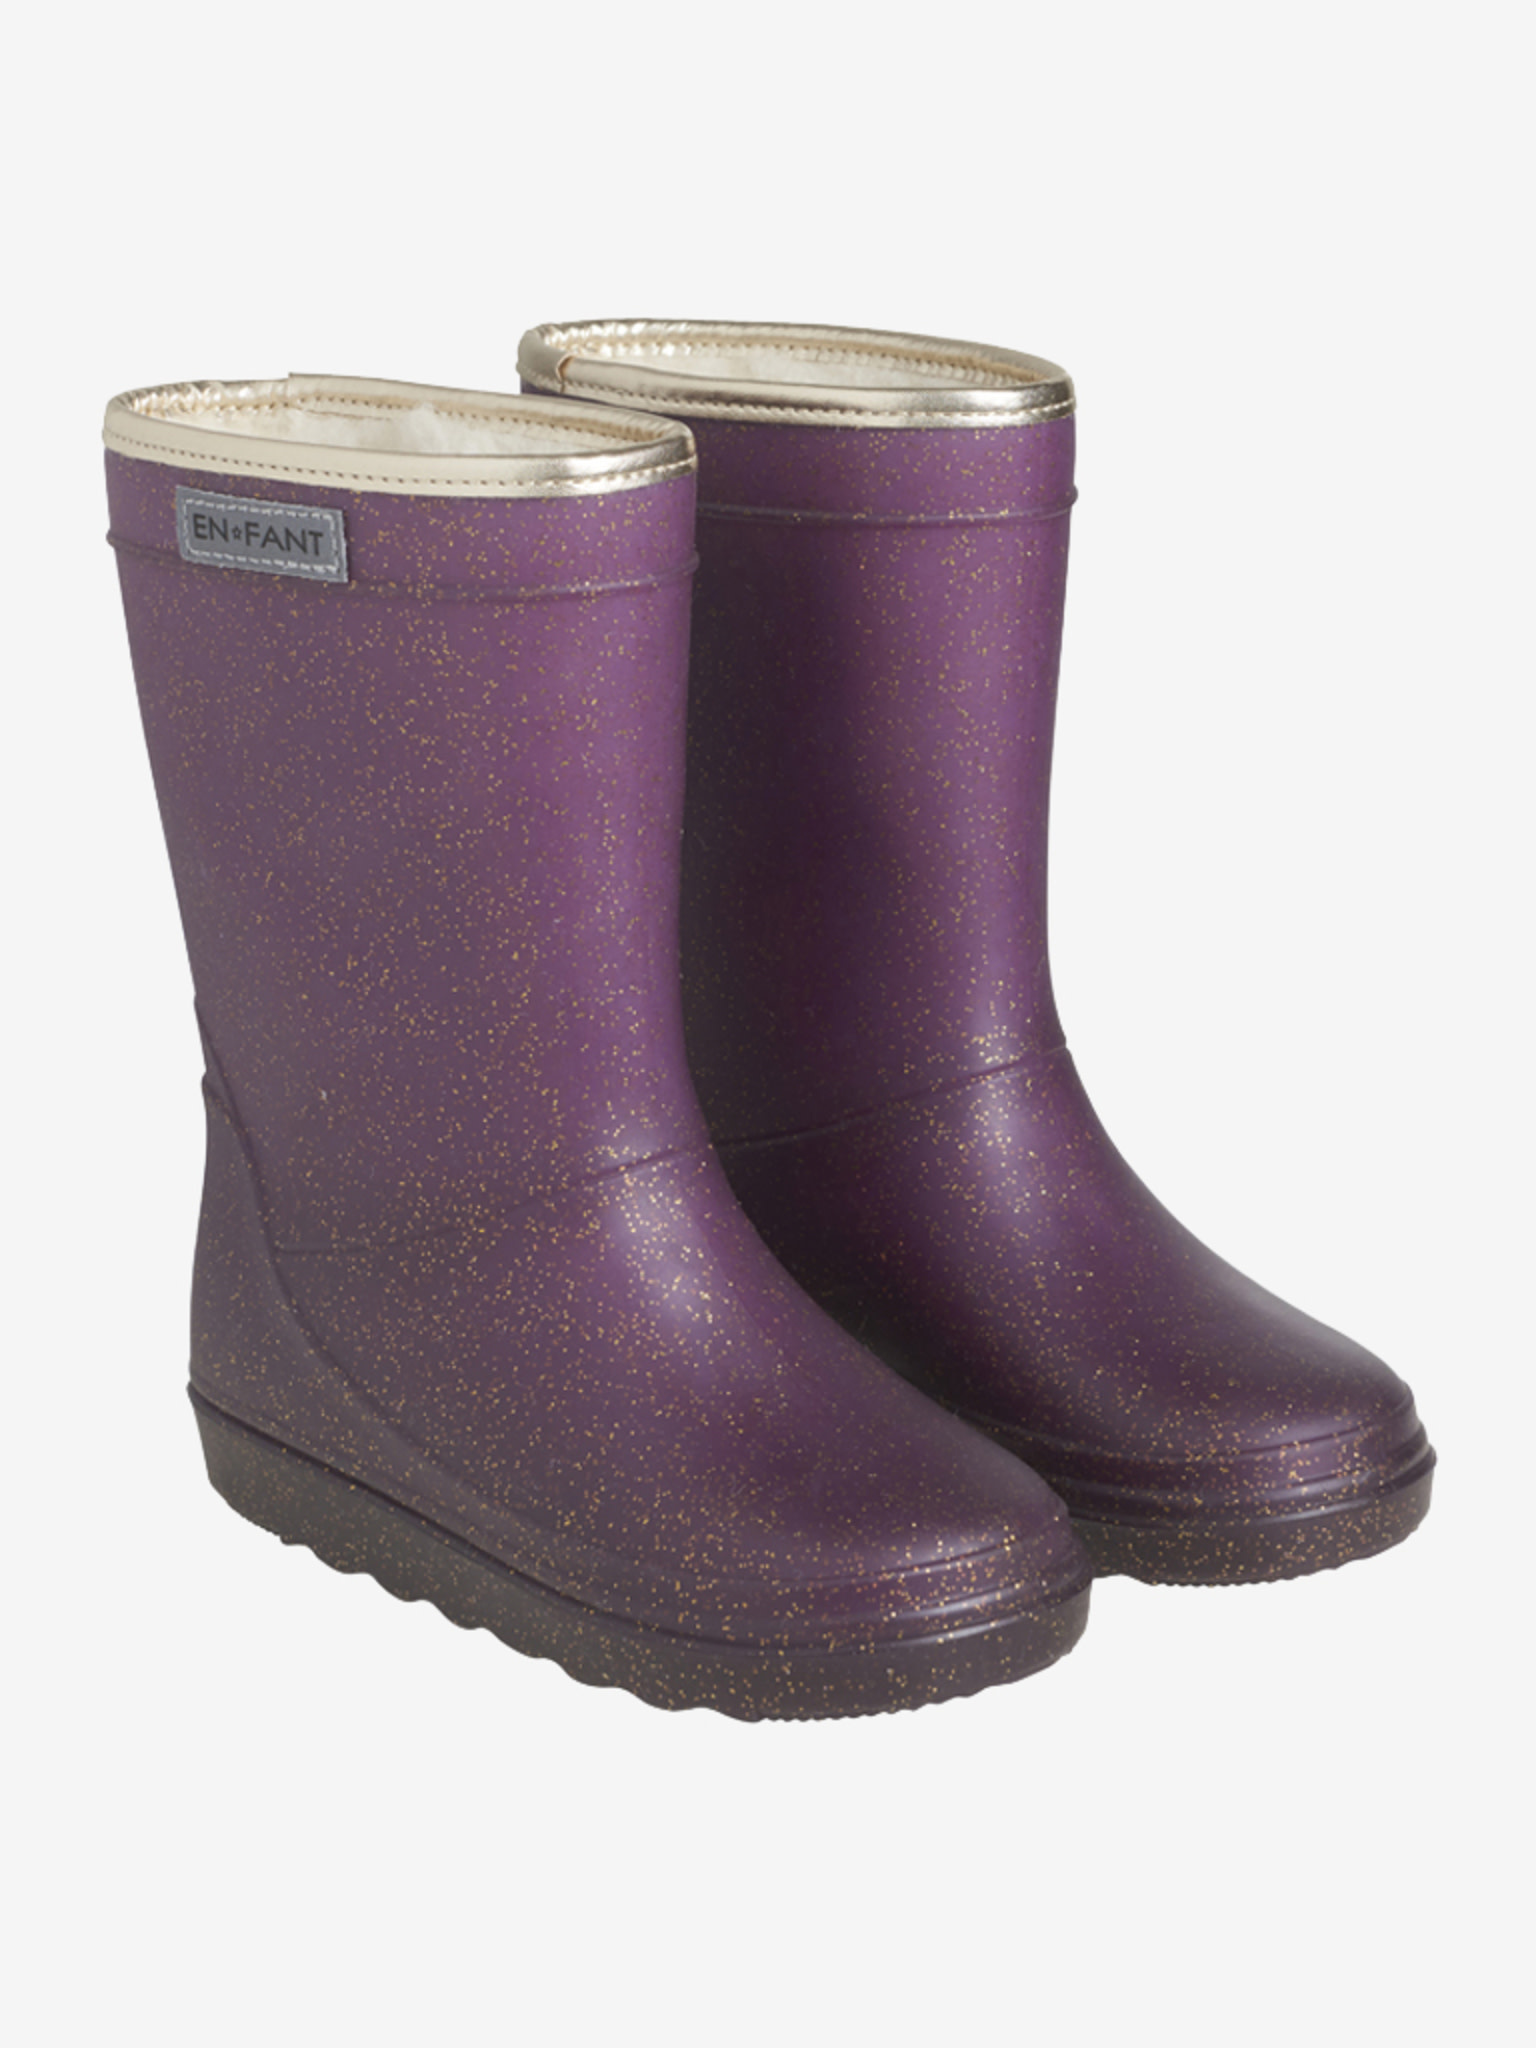 Enfant - Thermo boot Glitter Fig 4718-1